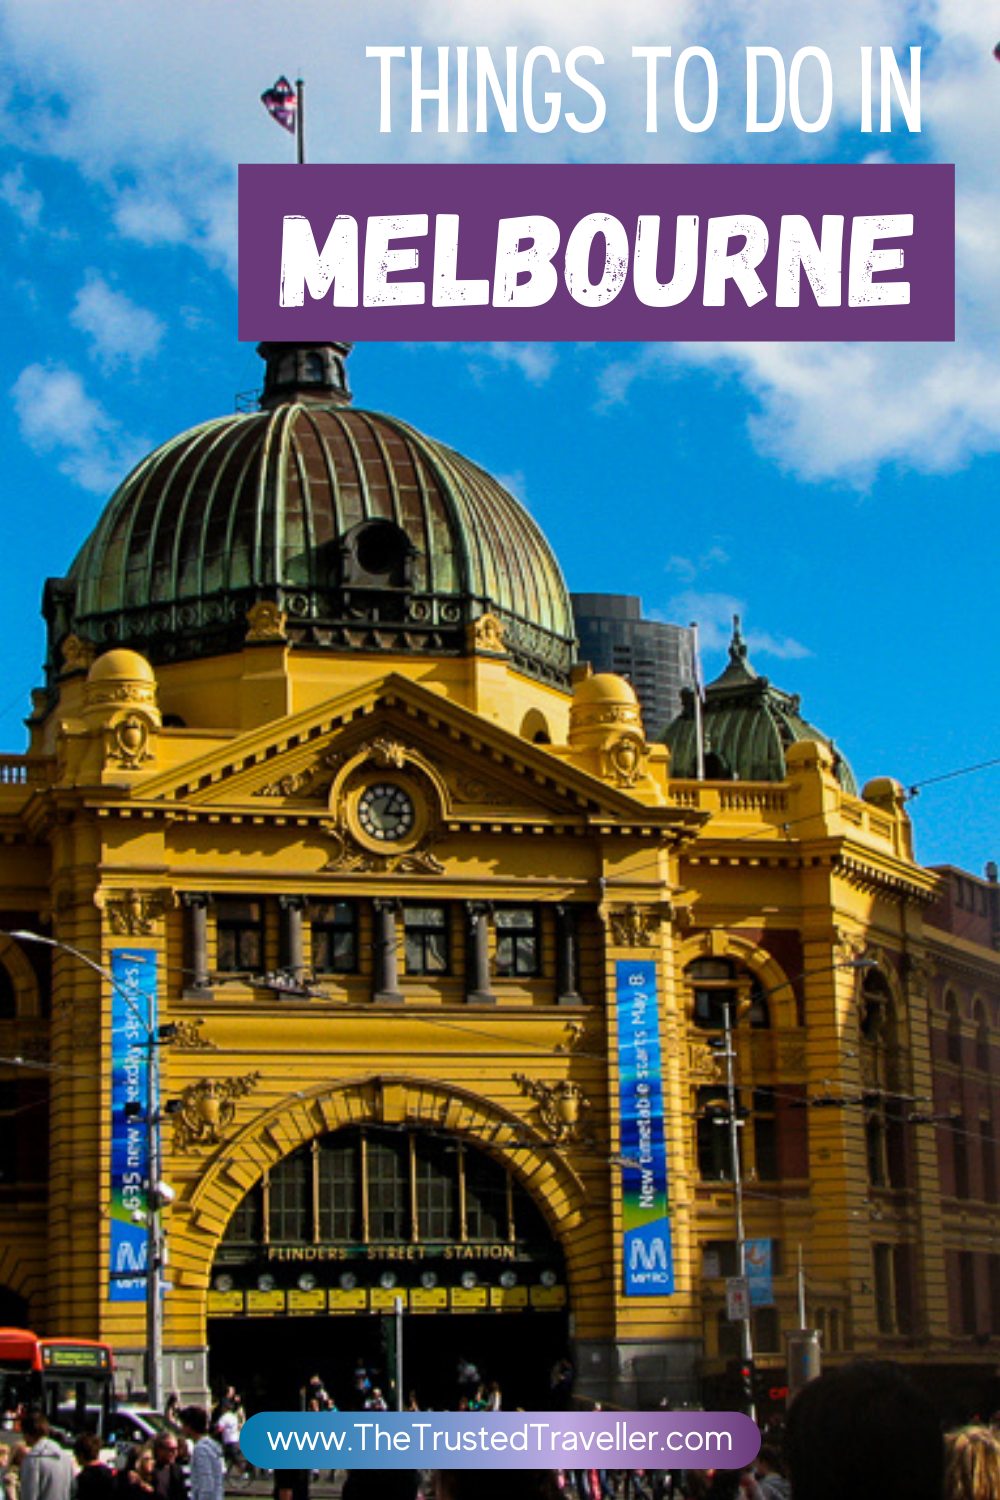 Things to Do in Melbourne - The Trusted Traveller